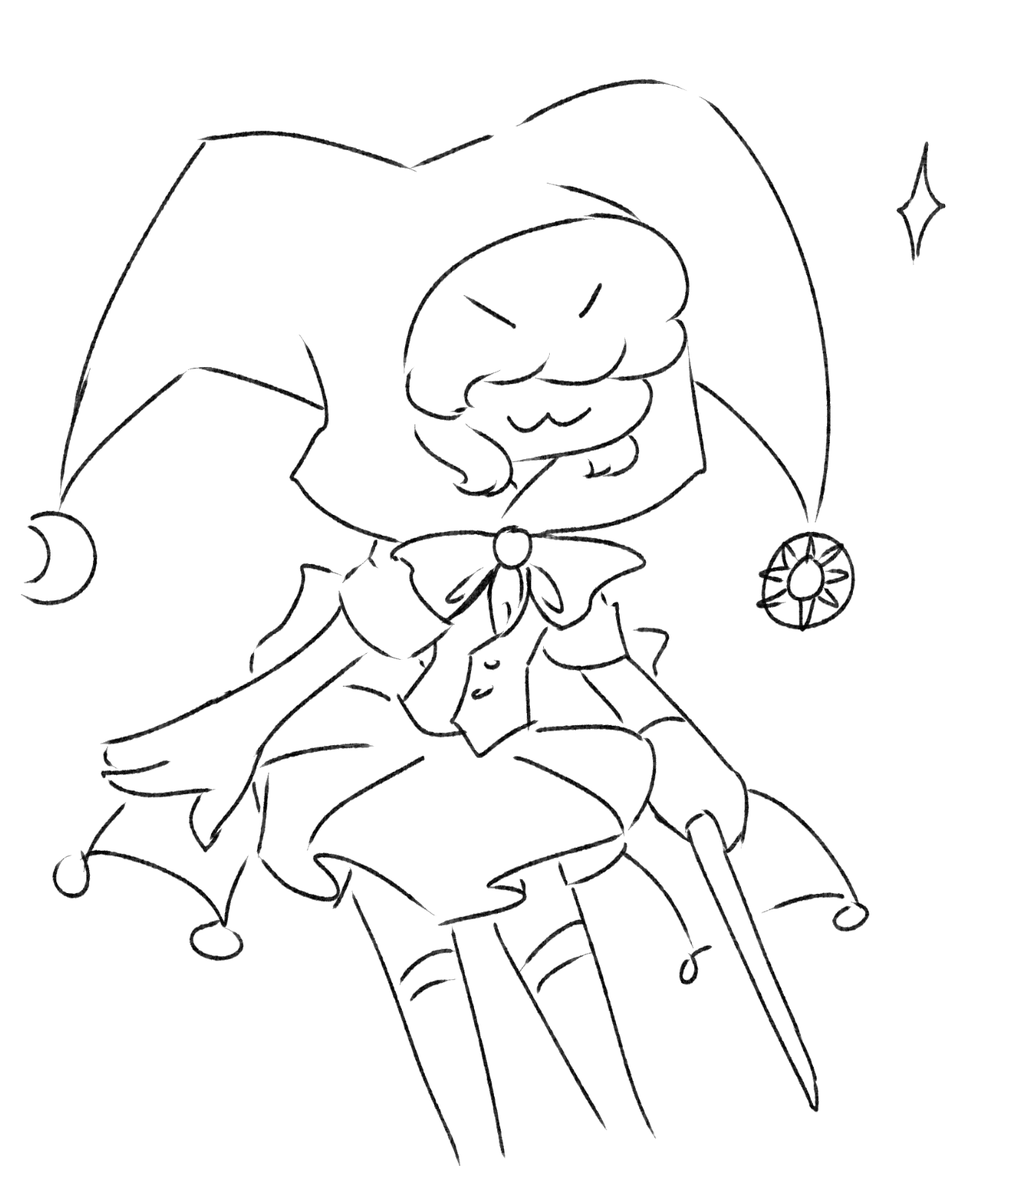 her capelet is a hoodie and it has two little dangly things. normally they'd droop down but her ears partially prop them up, giving a jester-like appearance